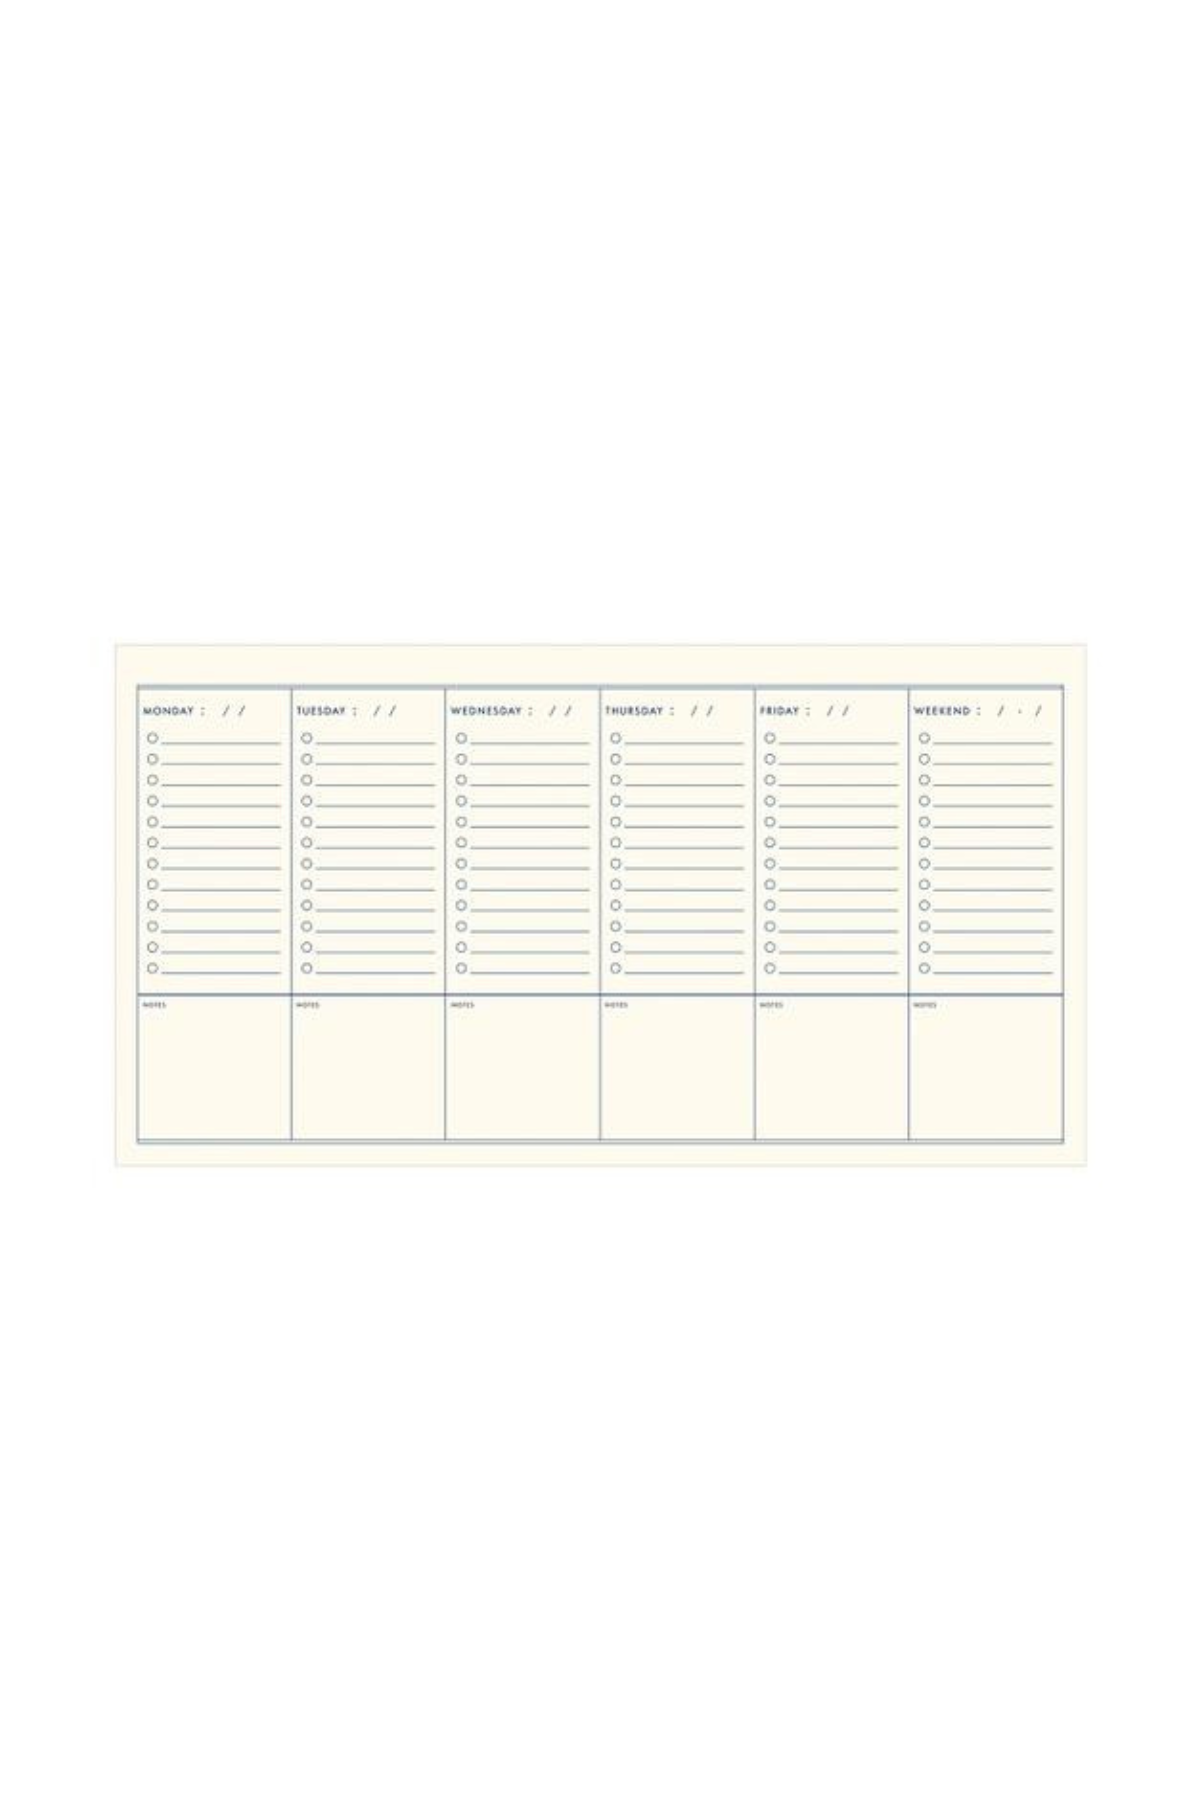 To Do Simple Undated Weekly Planner